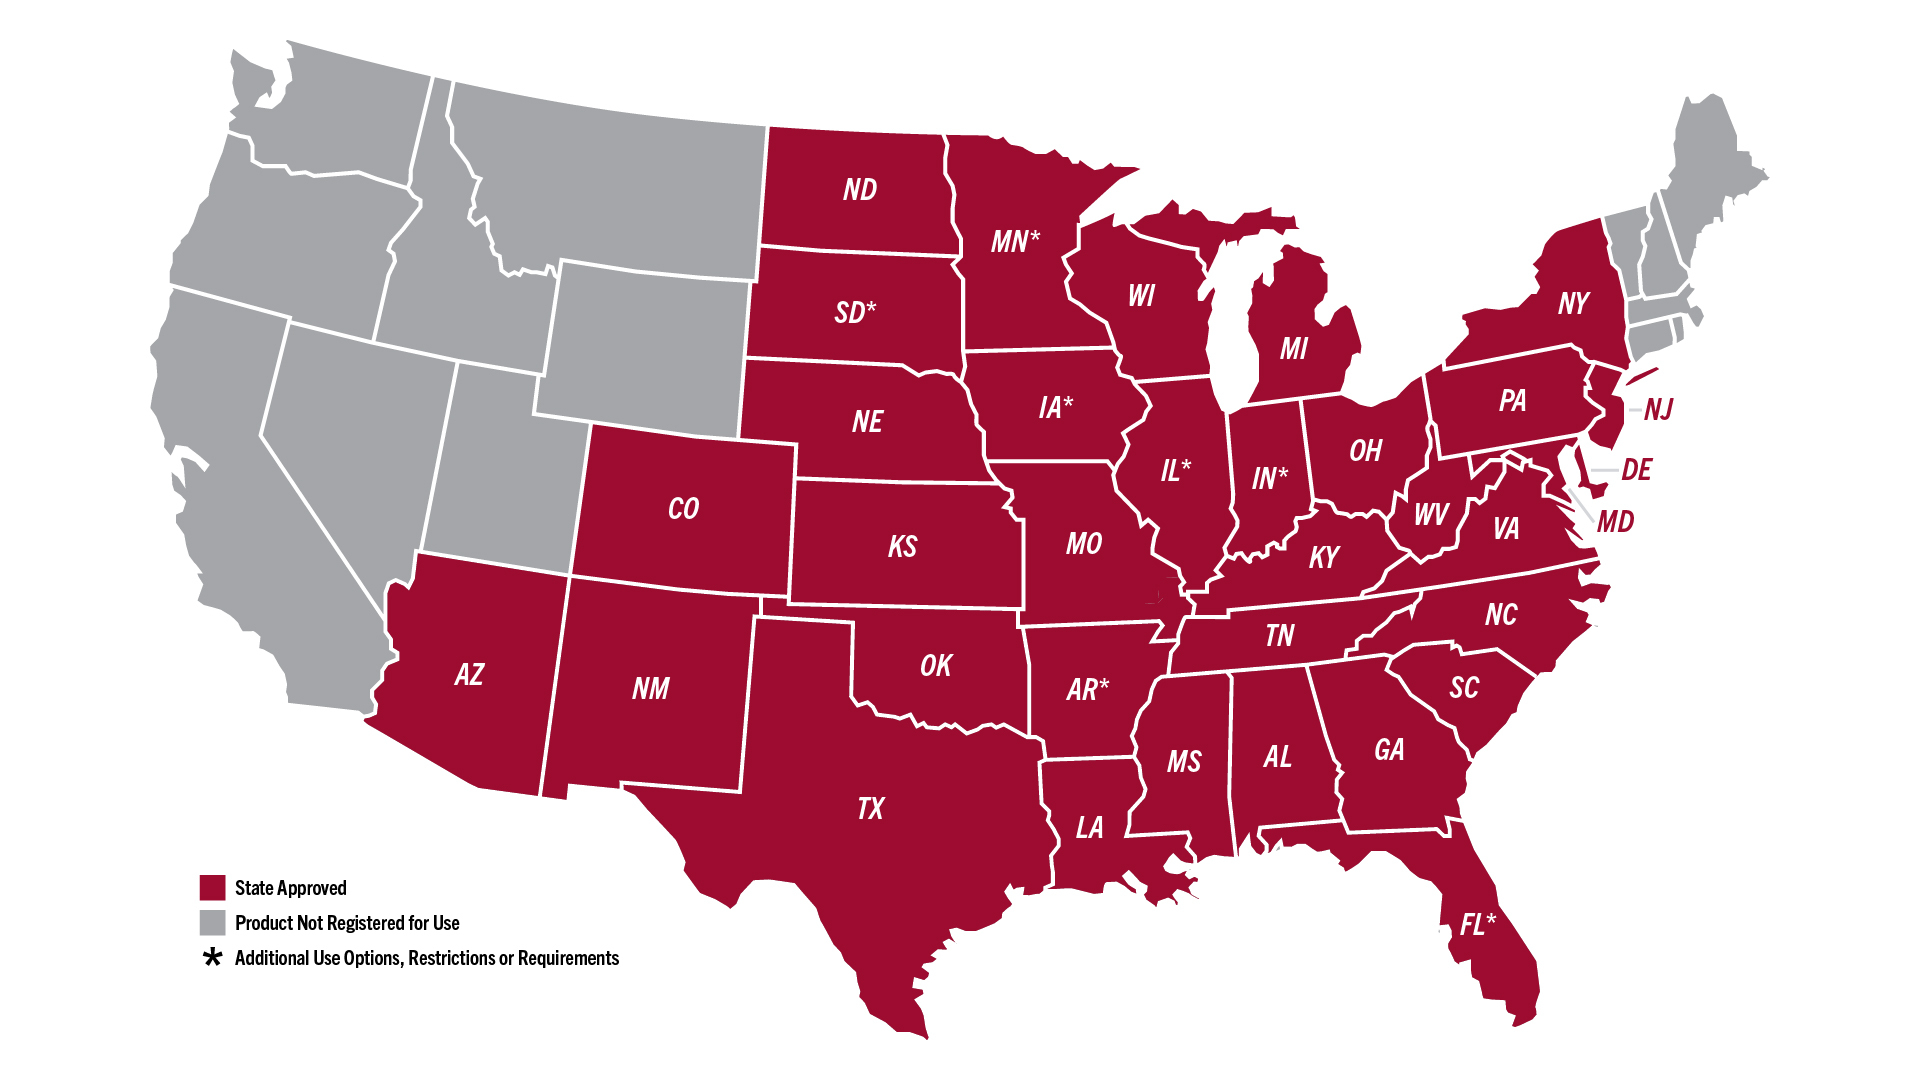 Graphic showing approved status of states. Next section links to state-specific information.